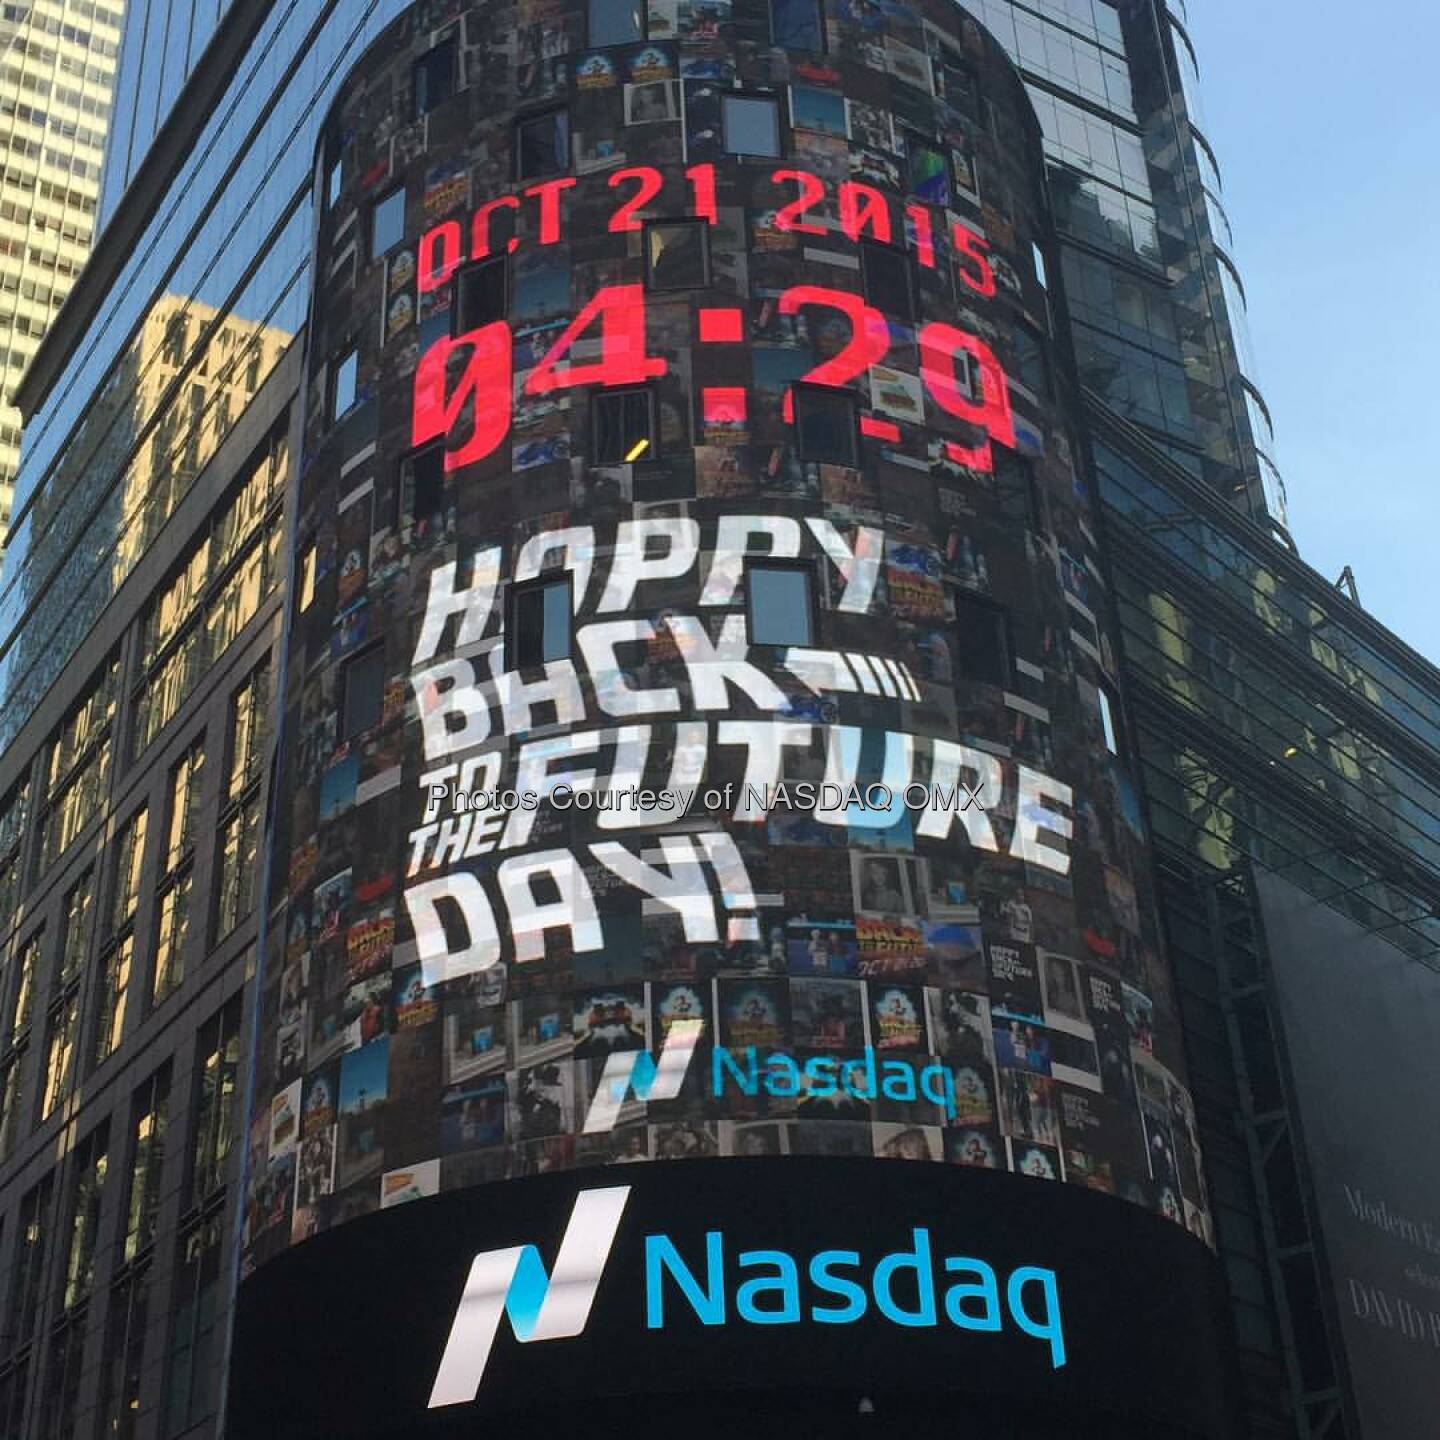 October 21st 2015, 4:29pm your #BackToTheFutureDay posts appear on the @Nasdaq Tower in #TimesSquare courtesy of #Nasdaq and @PayPal #BackToTheFuture #BTTF2015 watch the full video on #Periscope  Source: http://facebook.com/NASDAQ